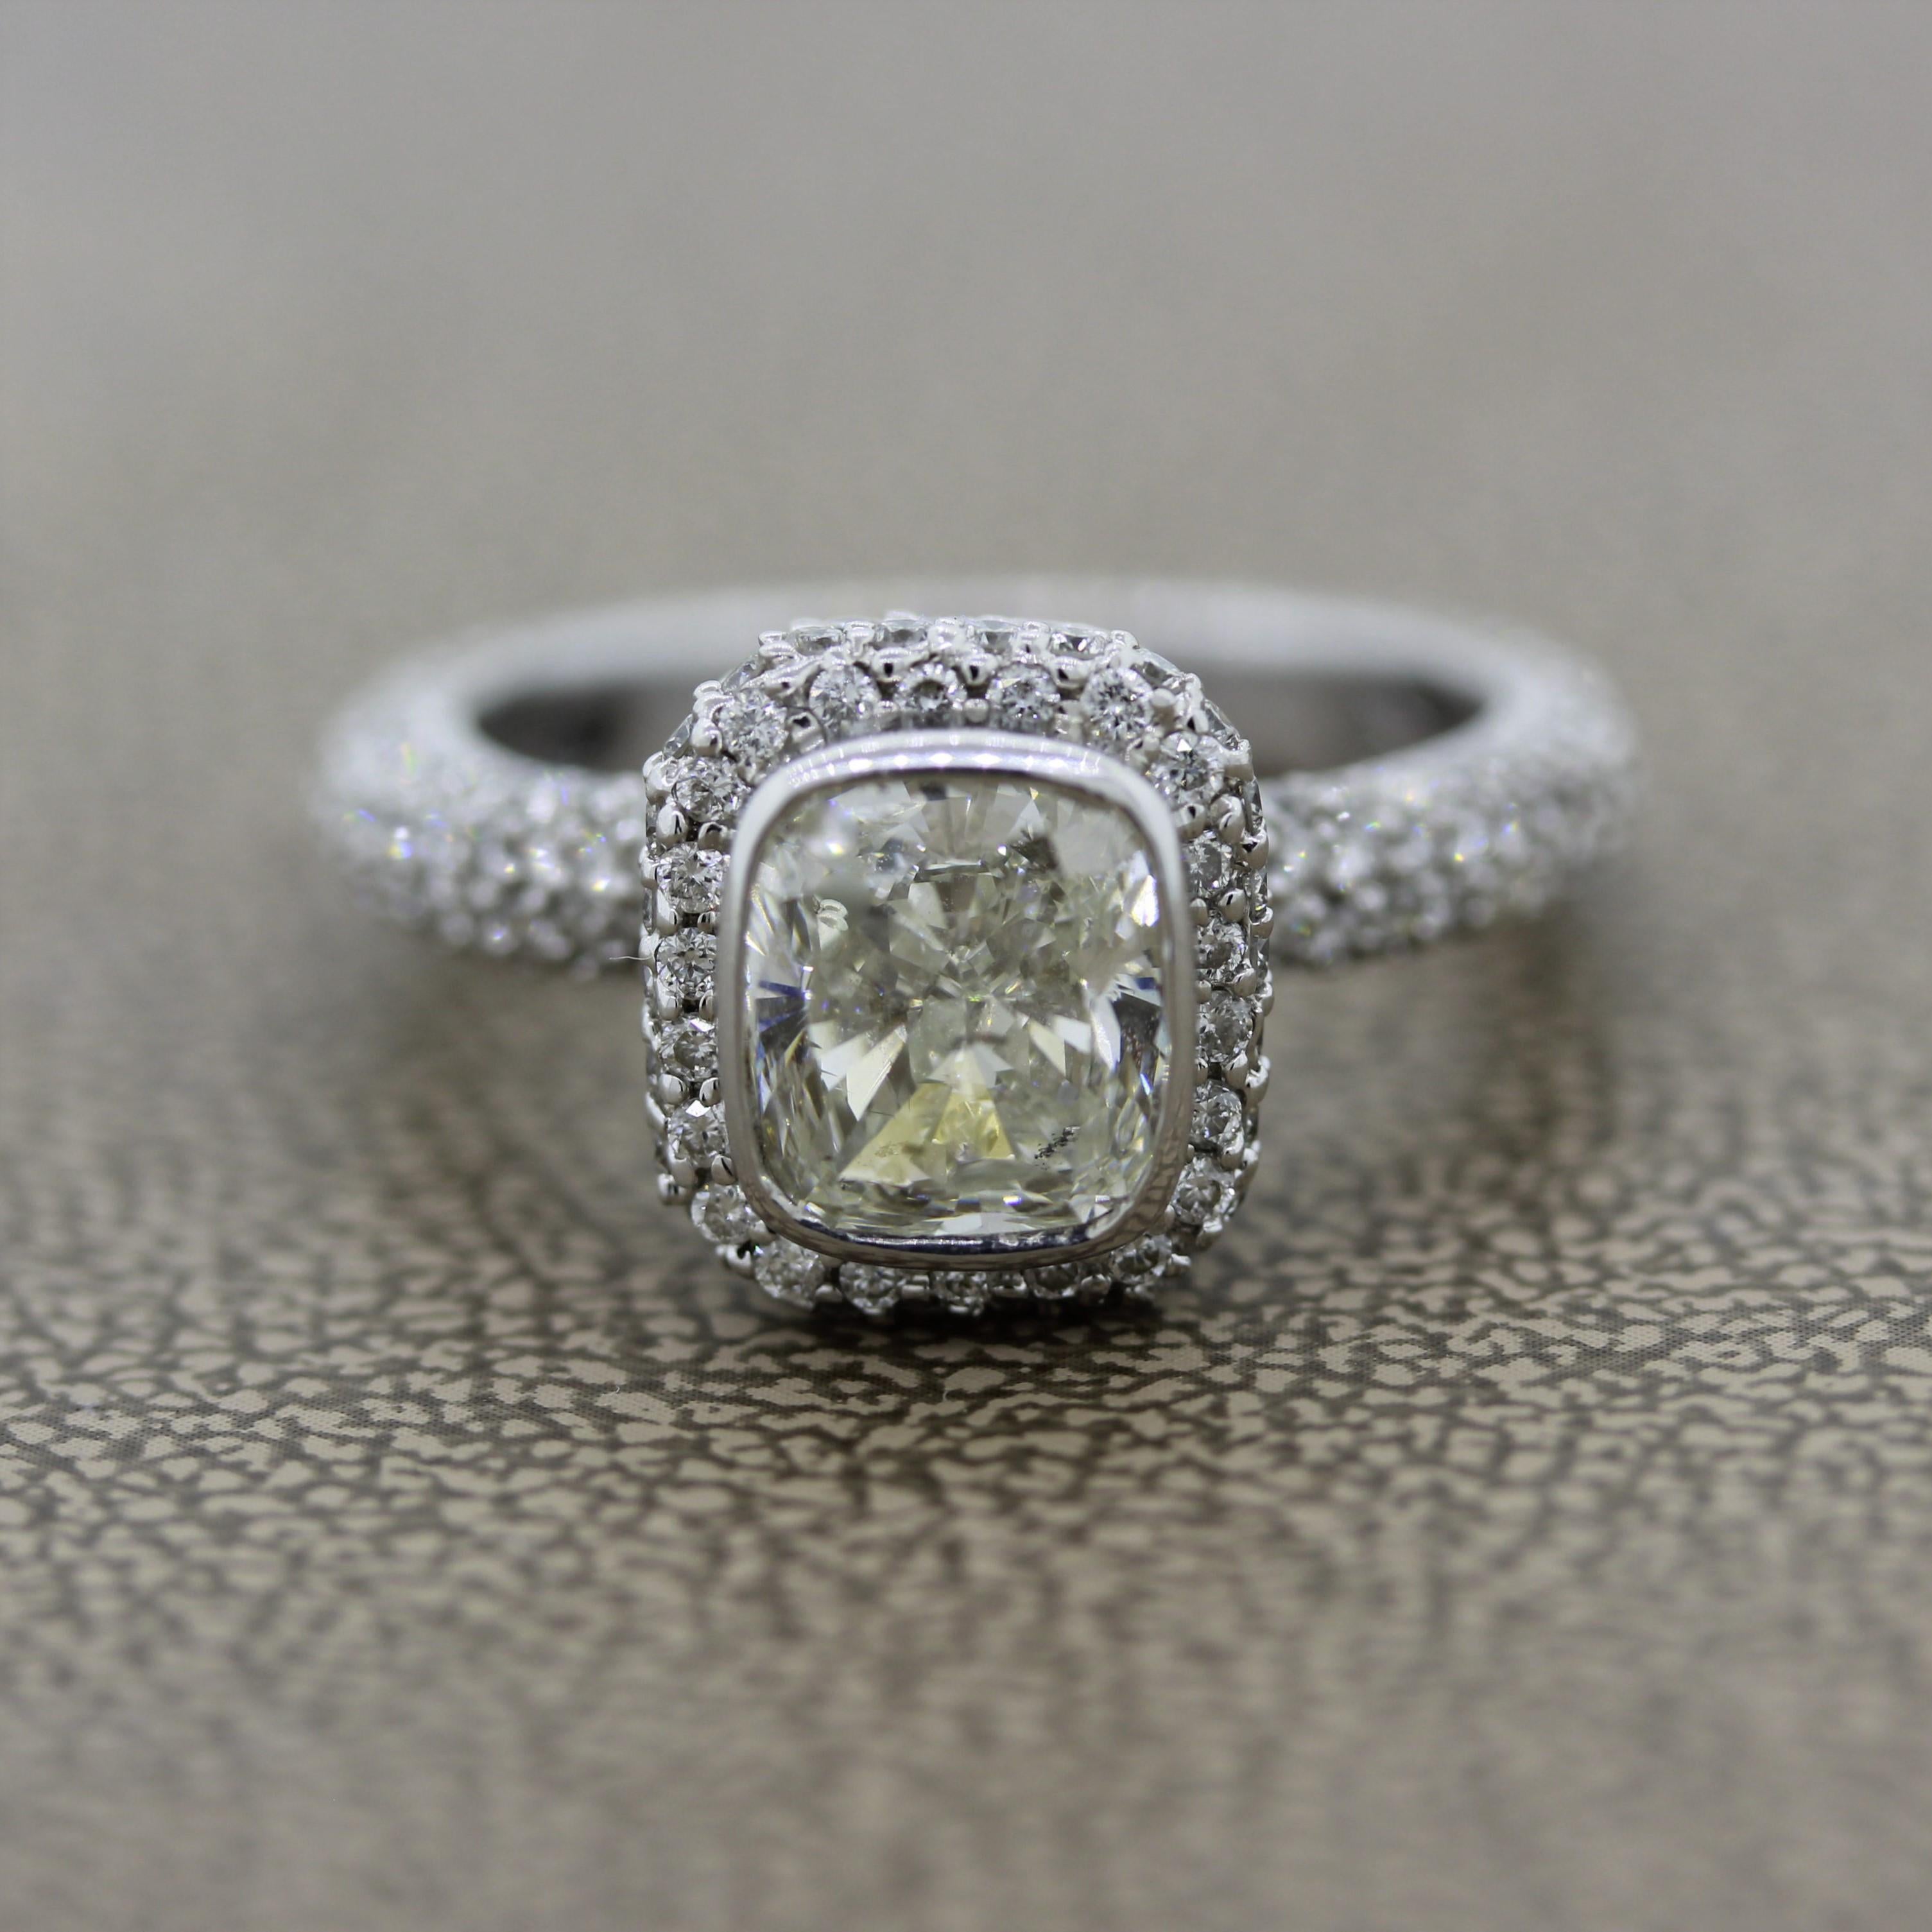 A lovely engagement ring meant to last many lifetimes! It features a 1.50 carat cushion cut diamond which is bezel set in the center. It is accented by 1.19 carats of round brilliant cut diamonds set around the center stone as well as the sides of